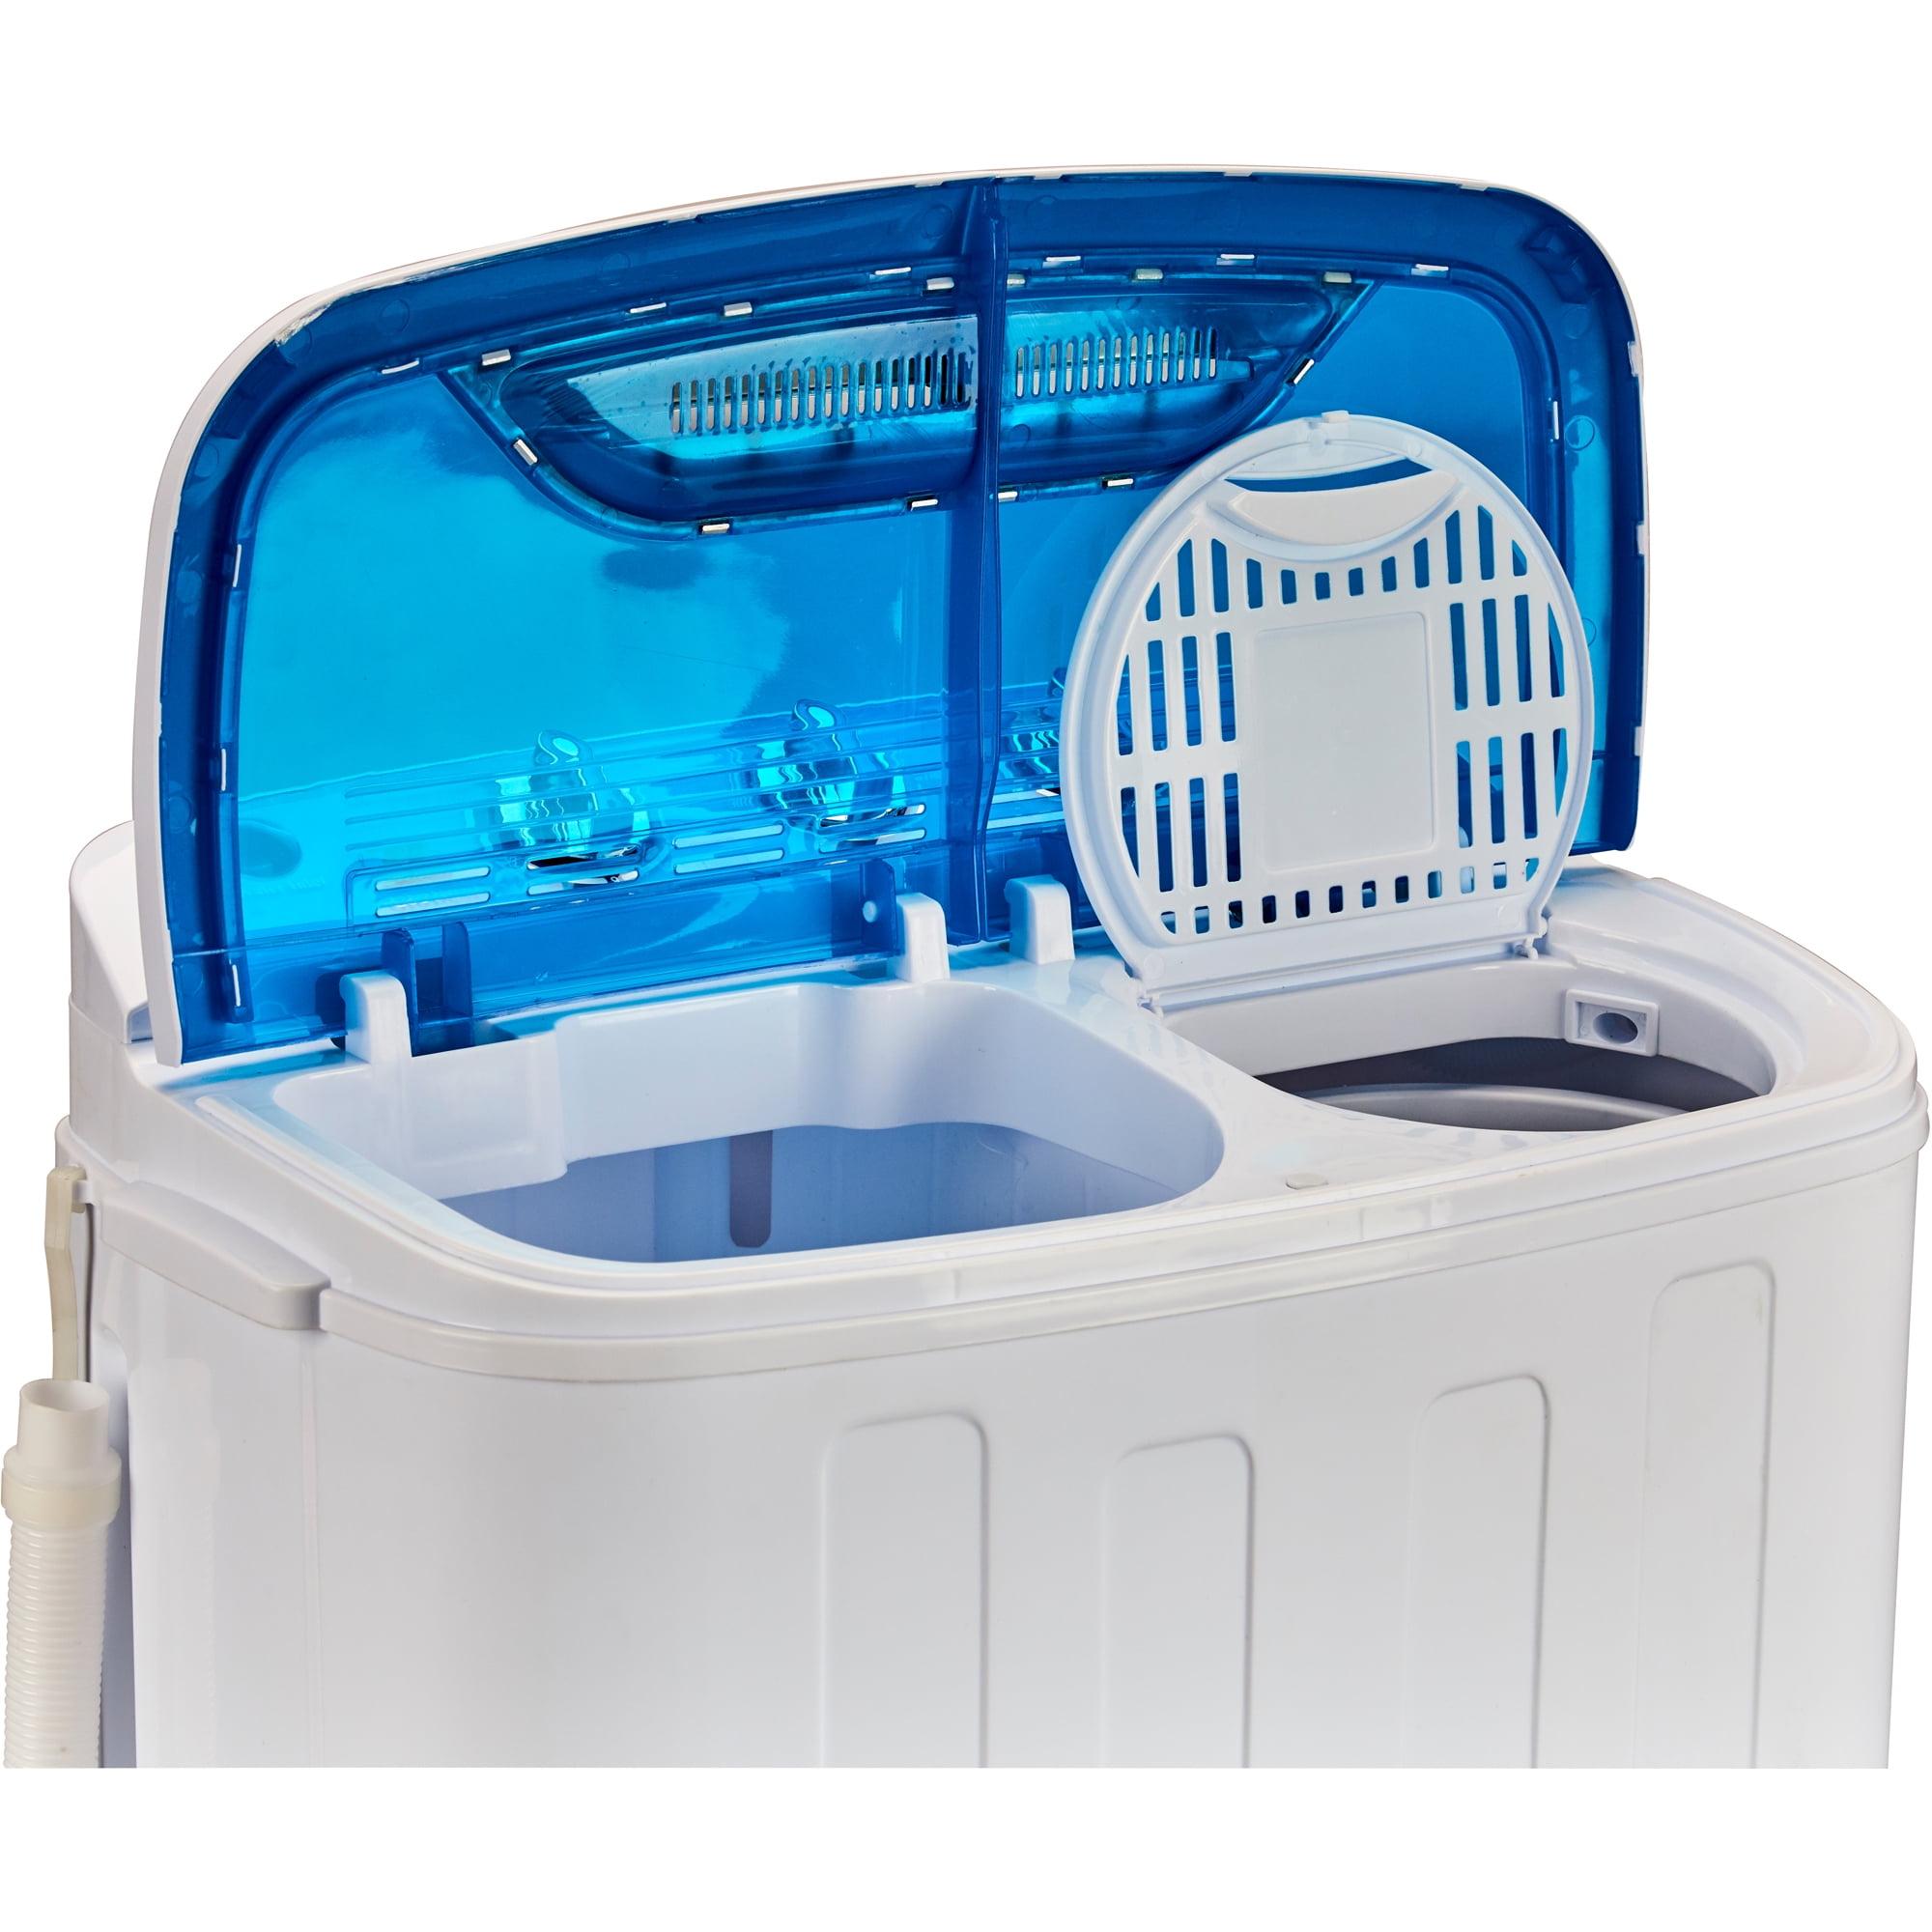 White Washing Machine Globest XPB36 Portable Twin Tub Washer 12.4lbs Spin Cycle,Translucent Cover 